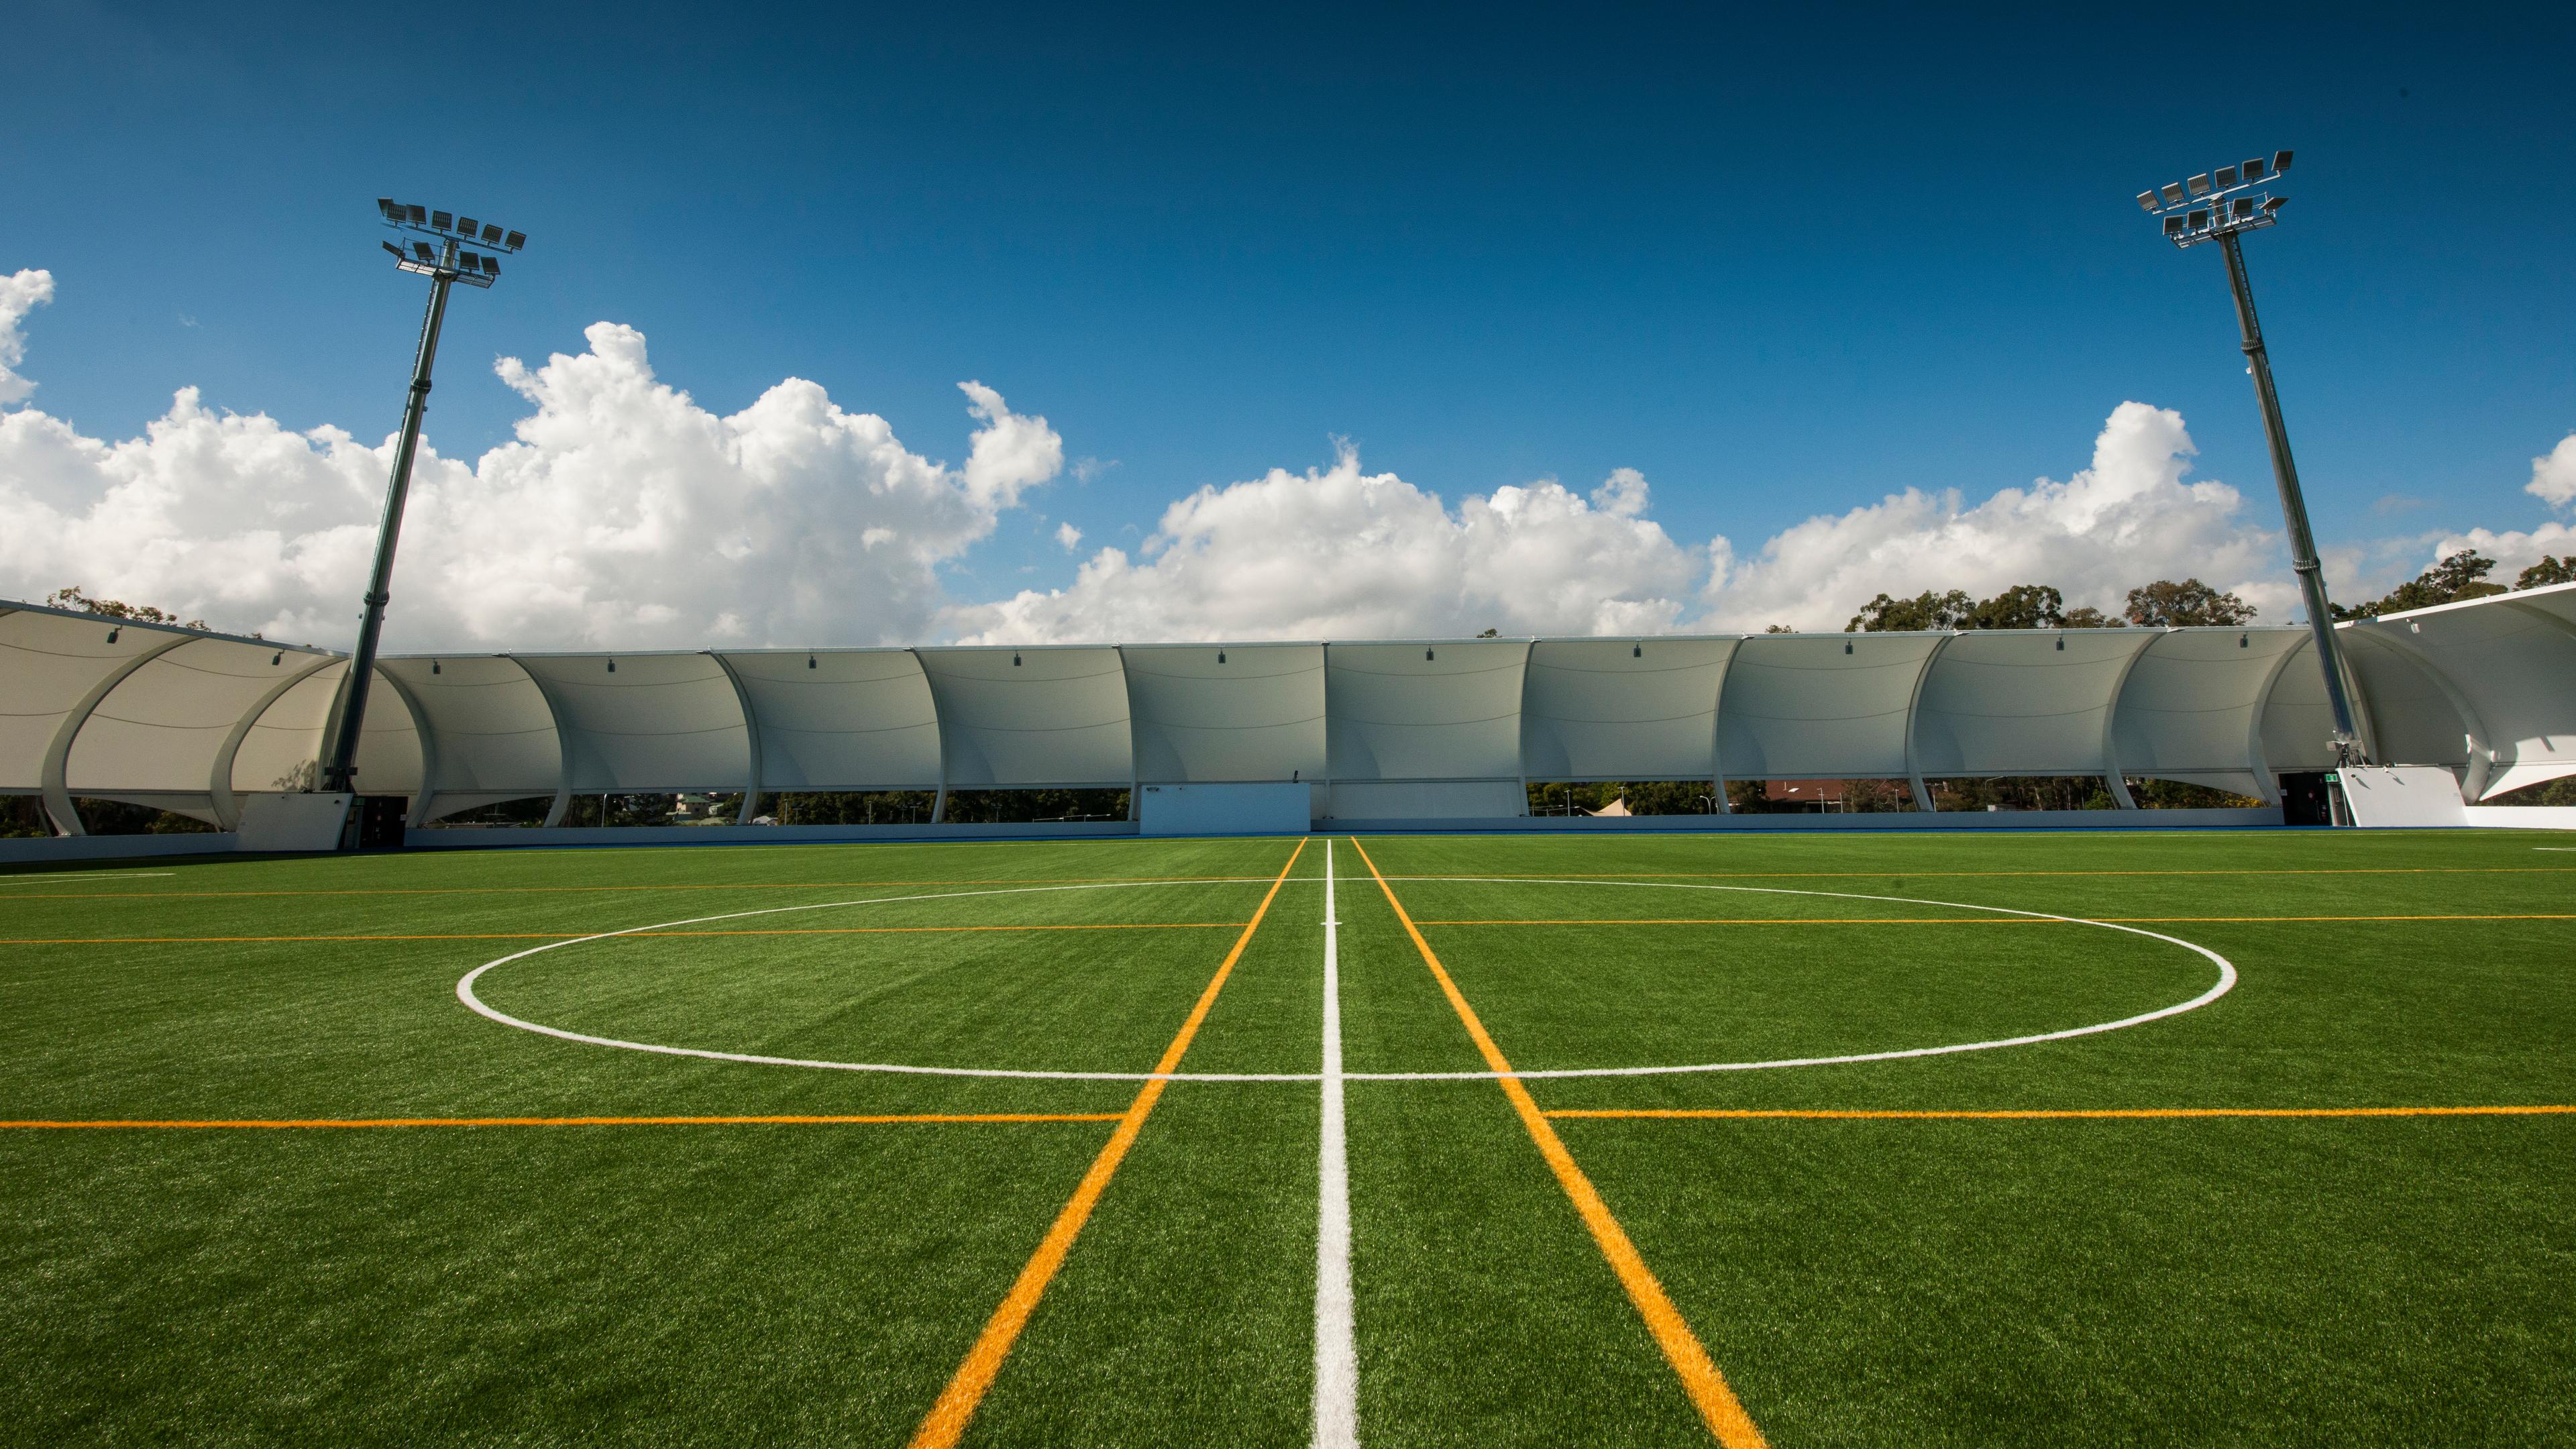 Image of sports field with shade covers